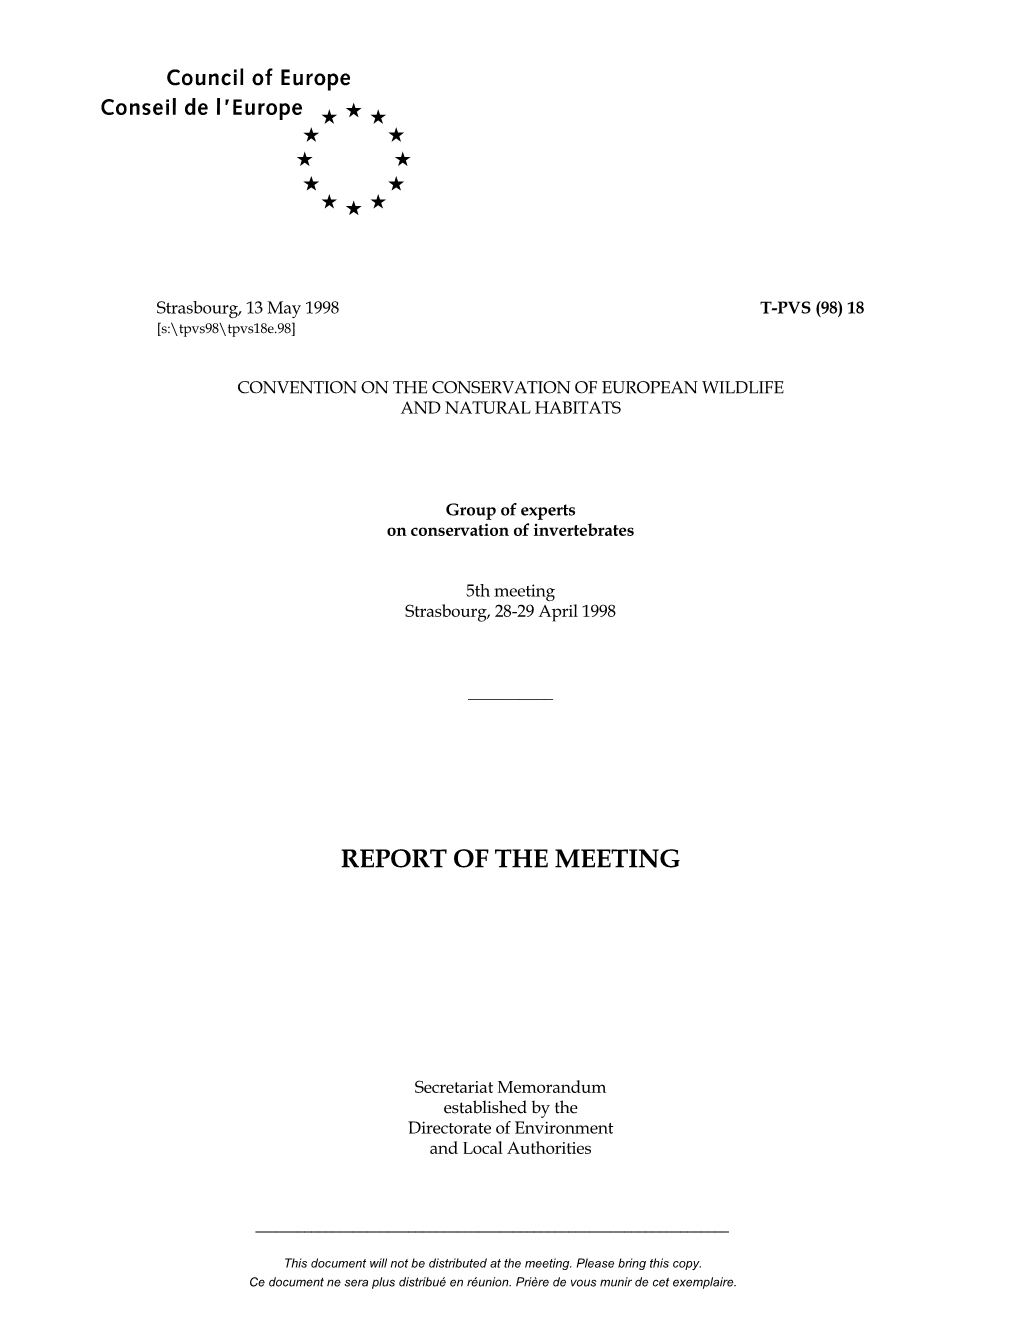 Report of the Meeting